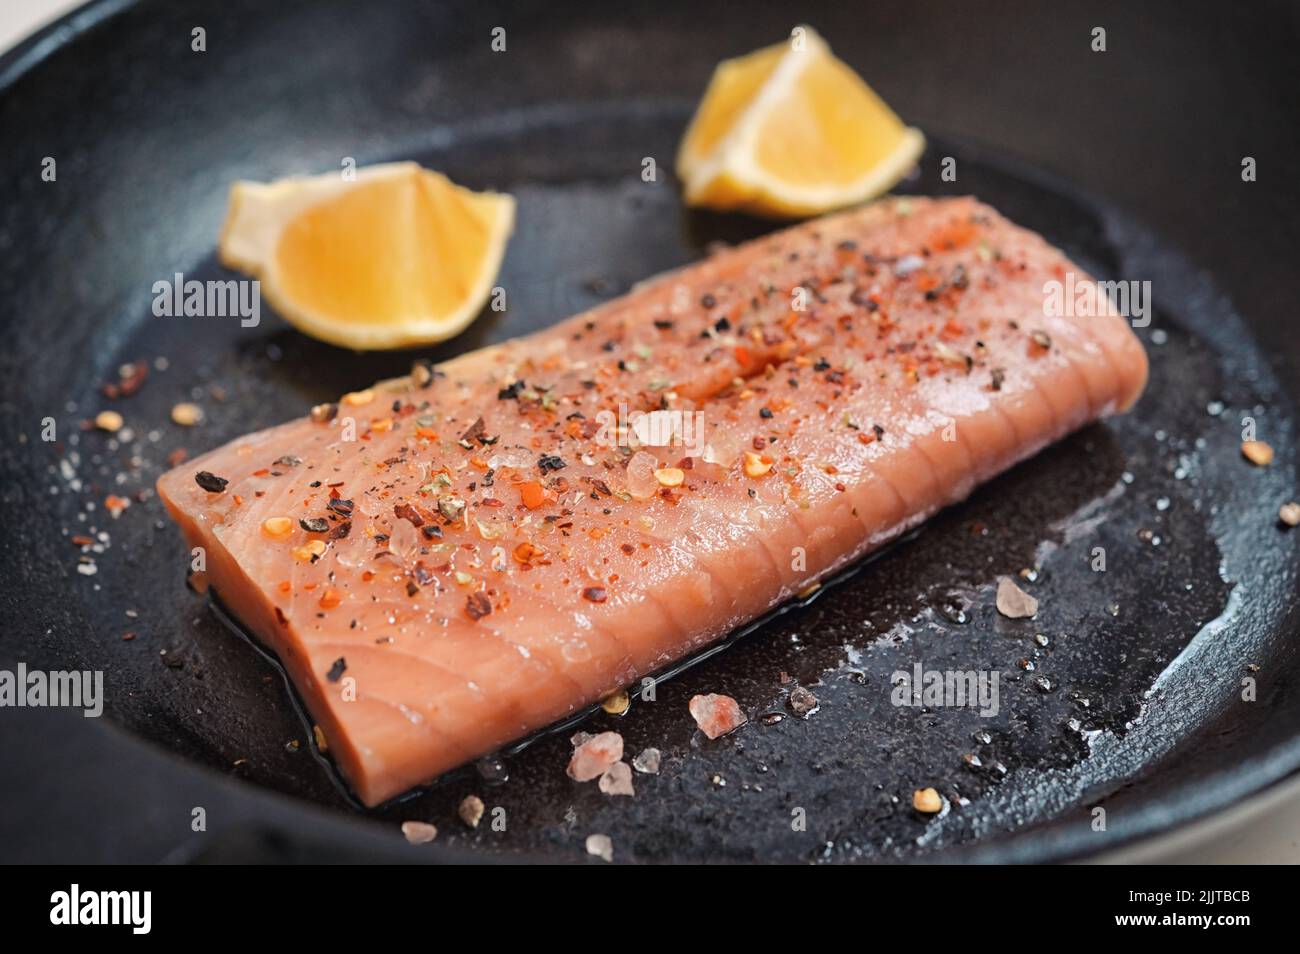 Roasted Salmon Fillet Steak In A Pan With Lemon Slices Stock Photo